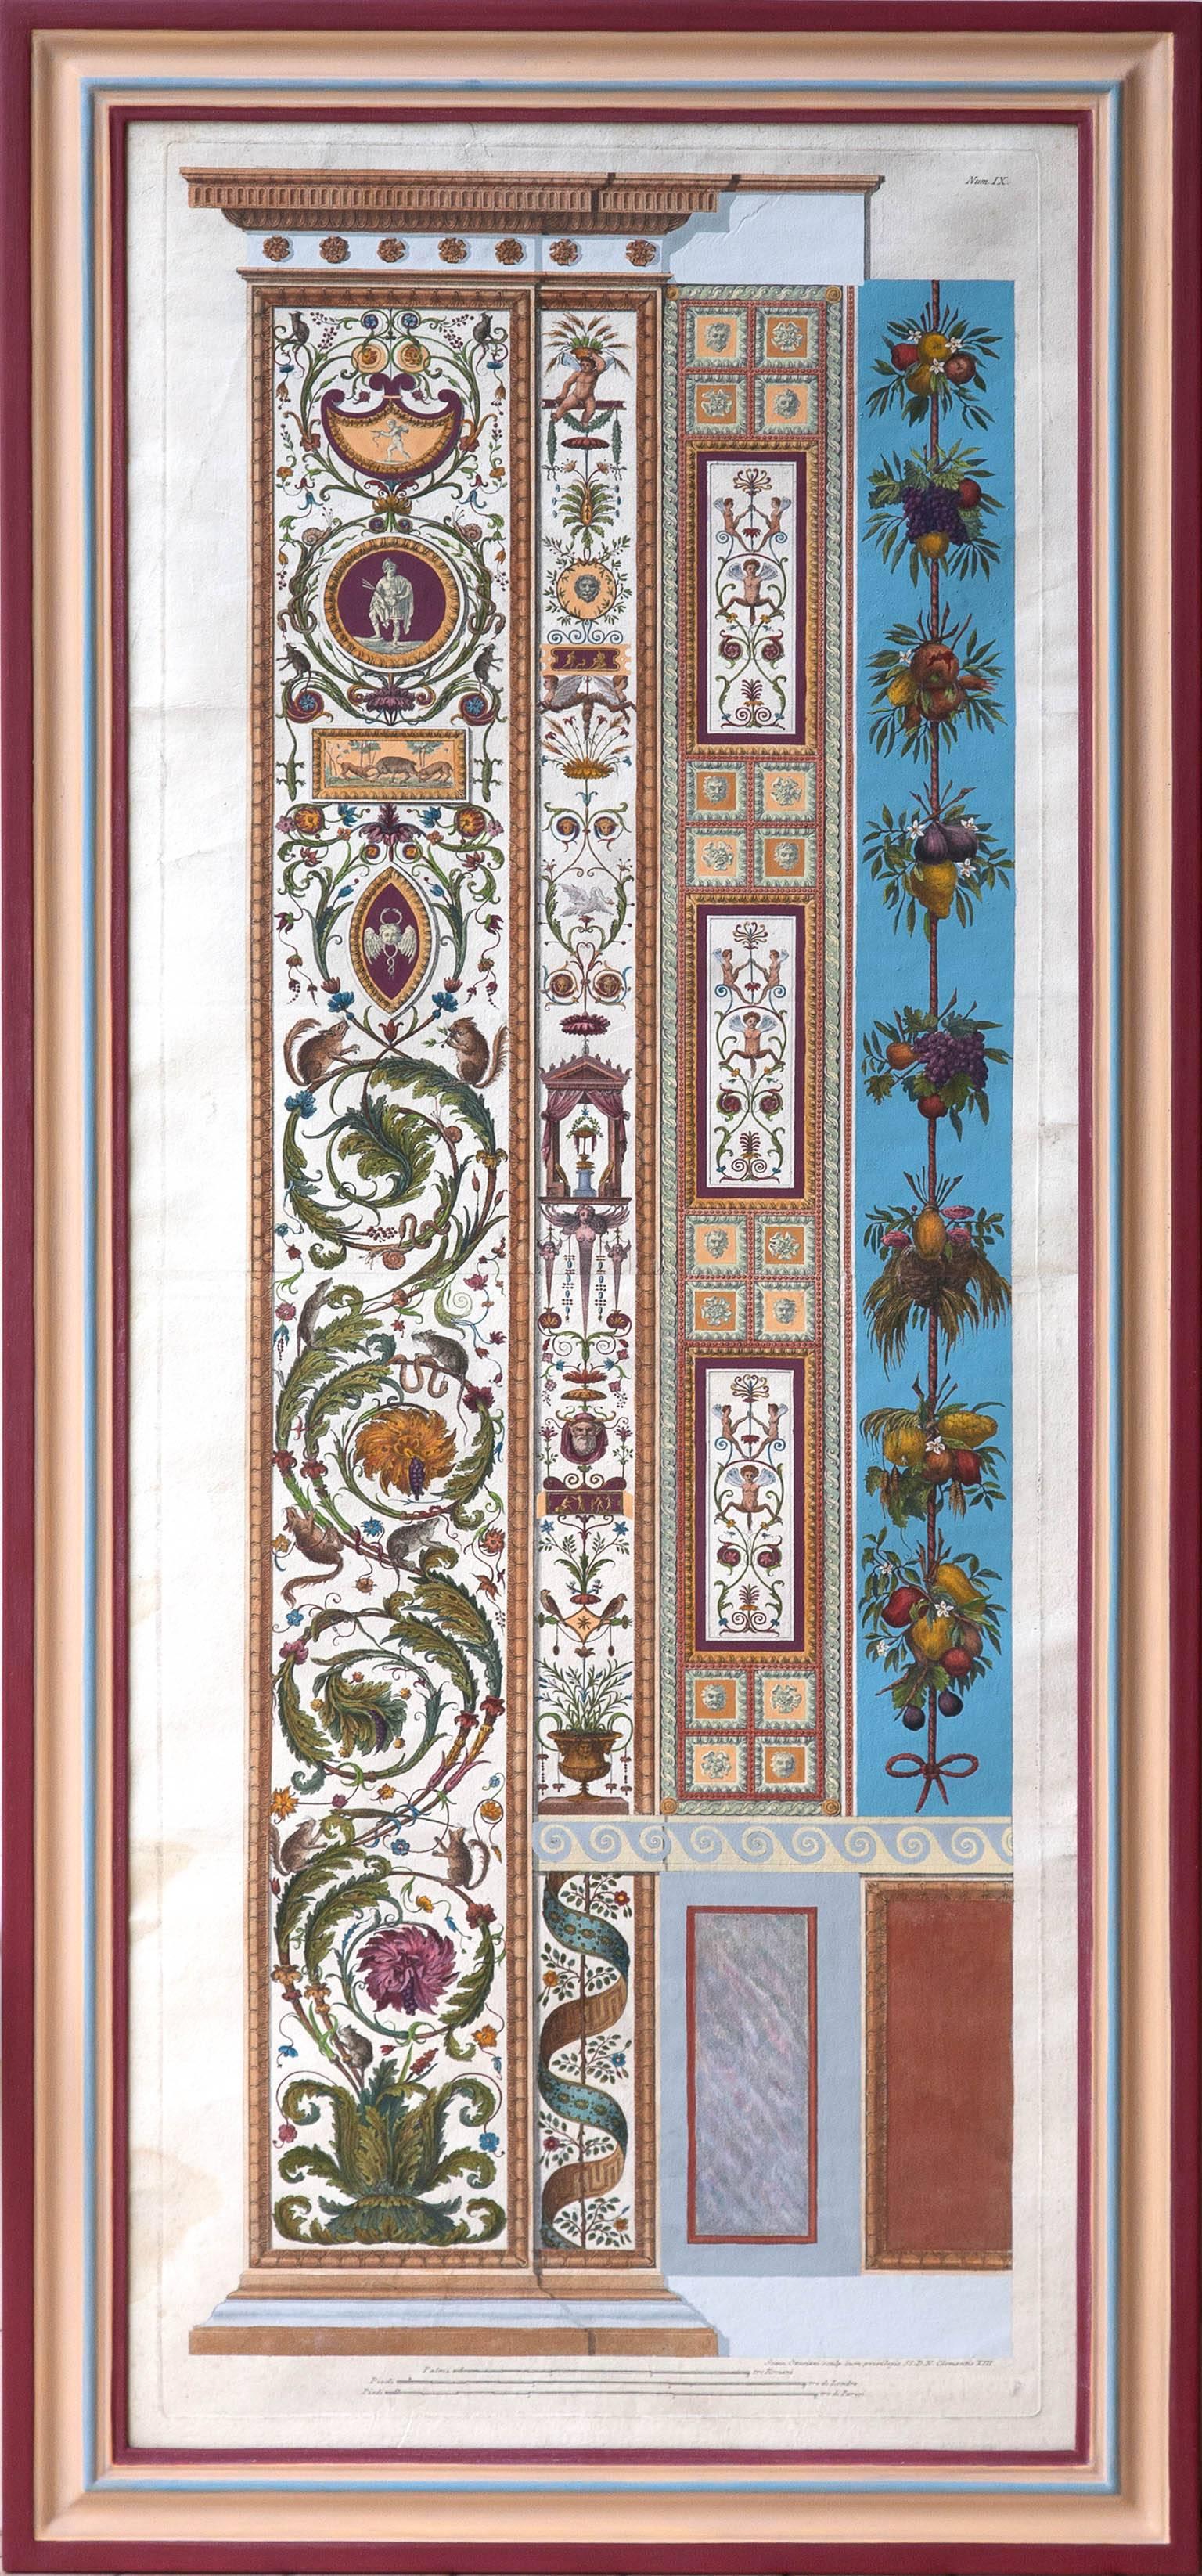 Engravings of architectural panels from 'Loggia Di Rafaele Nel Vatican'. Copper plate engravings after Raphael, engraved by Giovanni Volpato, Rome, circa 1775. With contemporary gouache hand coloring, and in handmade gessoes and painted frames.